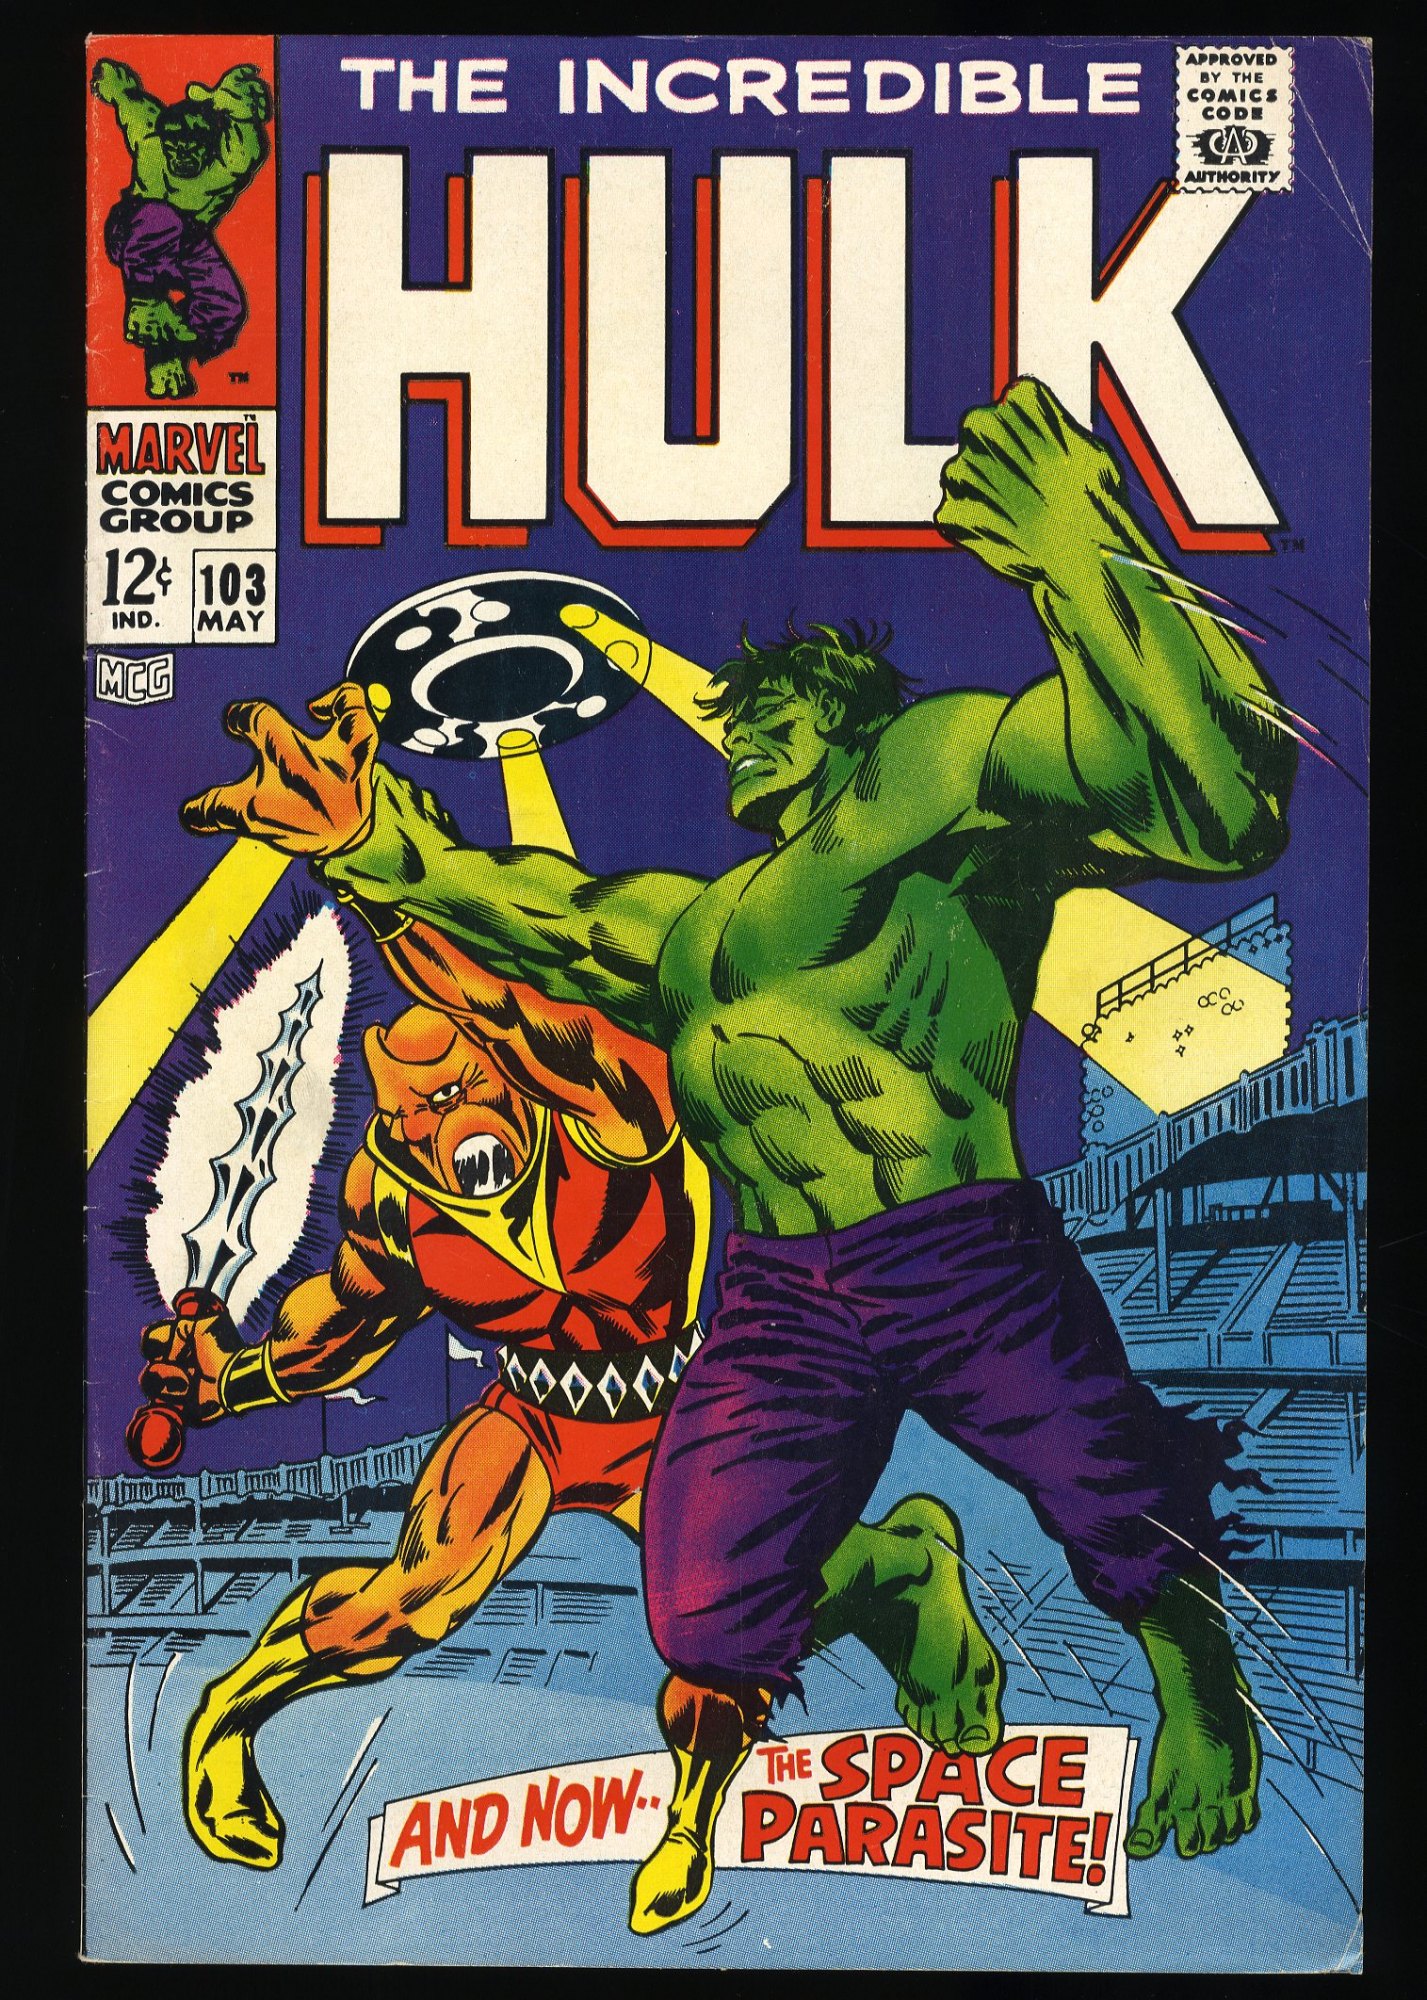 Incredible Hulk (1962) #103 FN+ 6.5 1st Appearance Space Parasite!